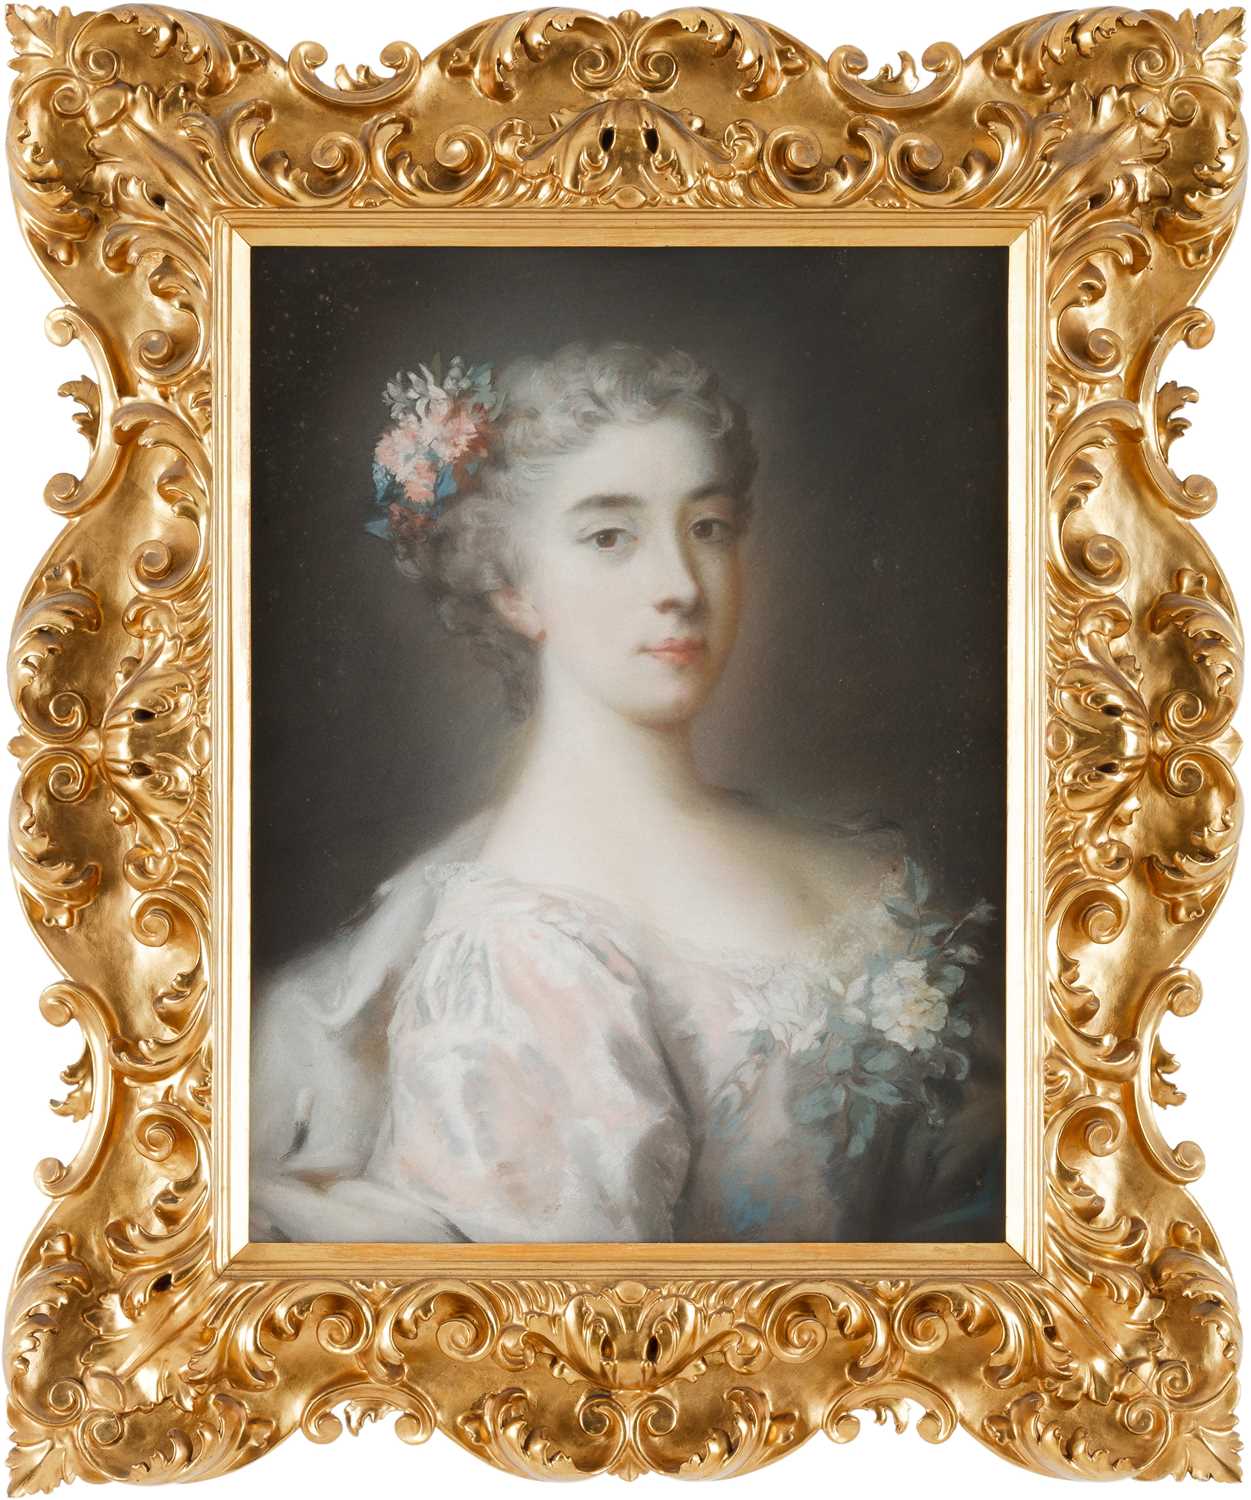 Lot 858 - AN 18TH/19TH CENTURY PASTEL PORTRAIT OF A LADY